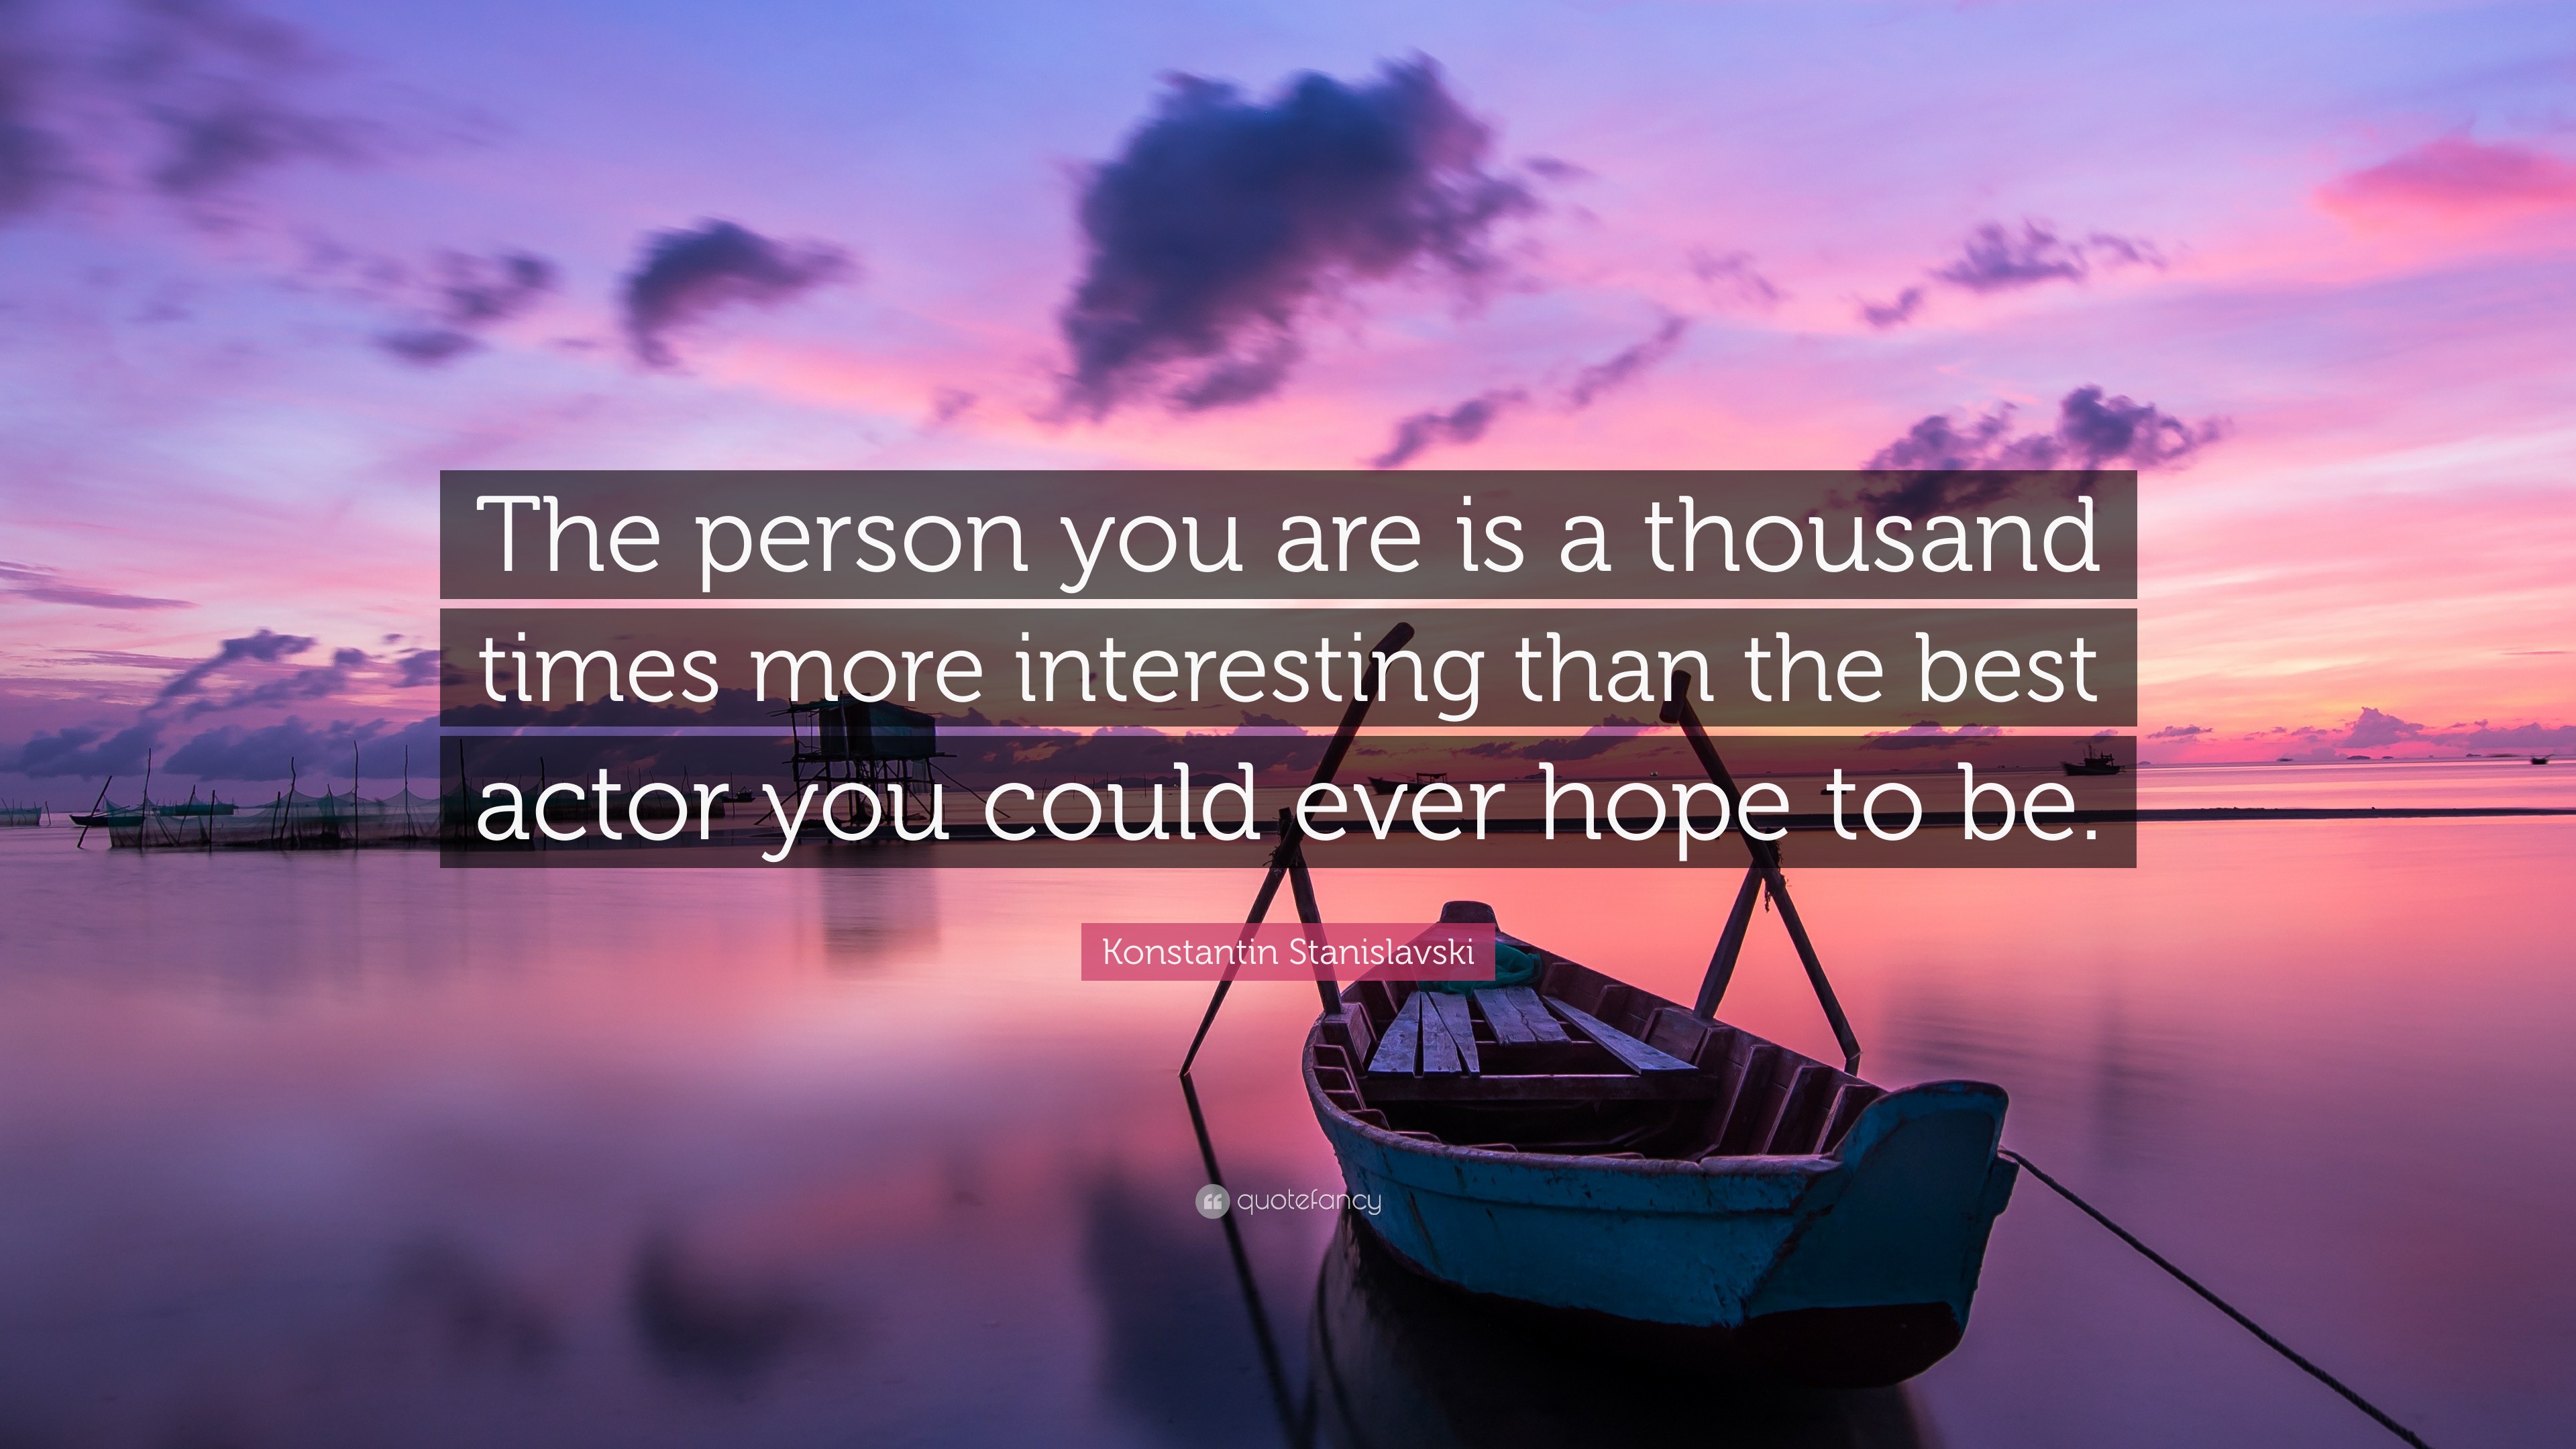 Konstantin Stanislavski Quote: “The person you are is a thousand times ...